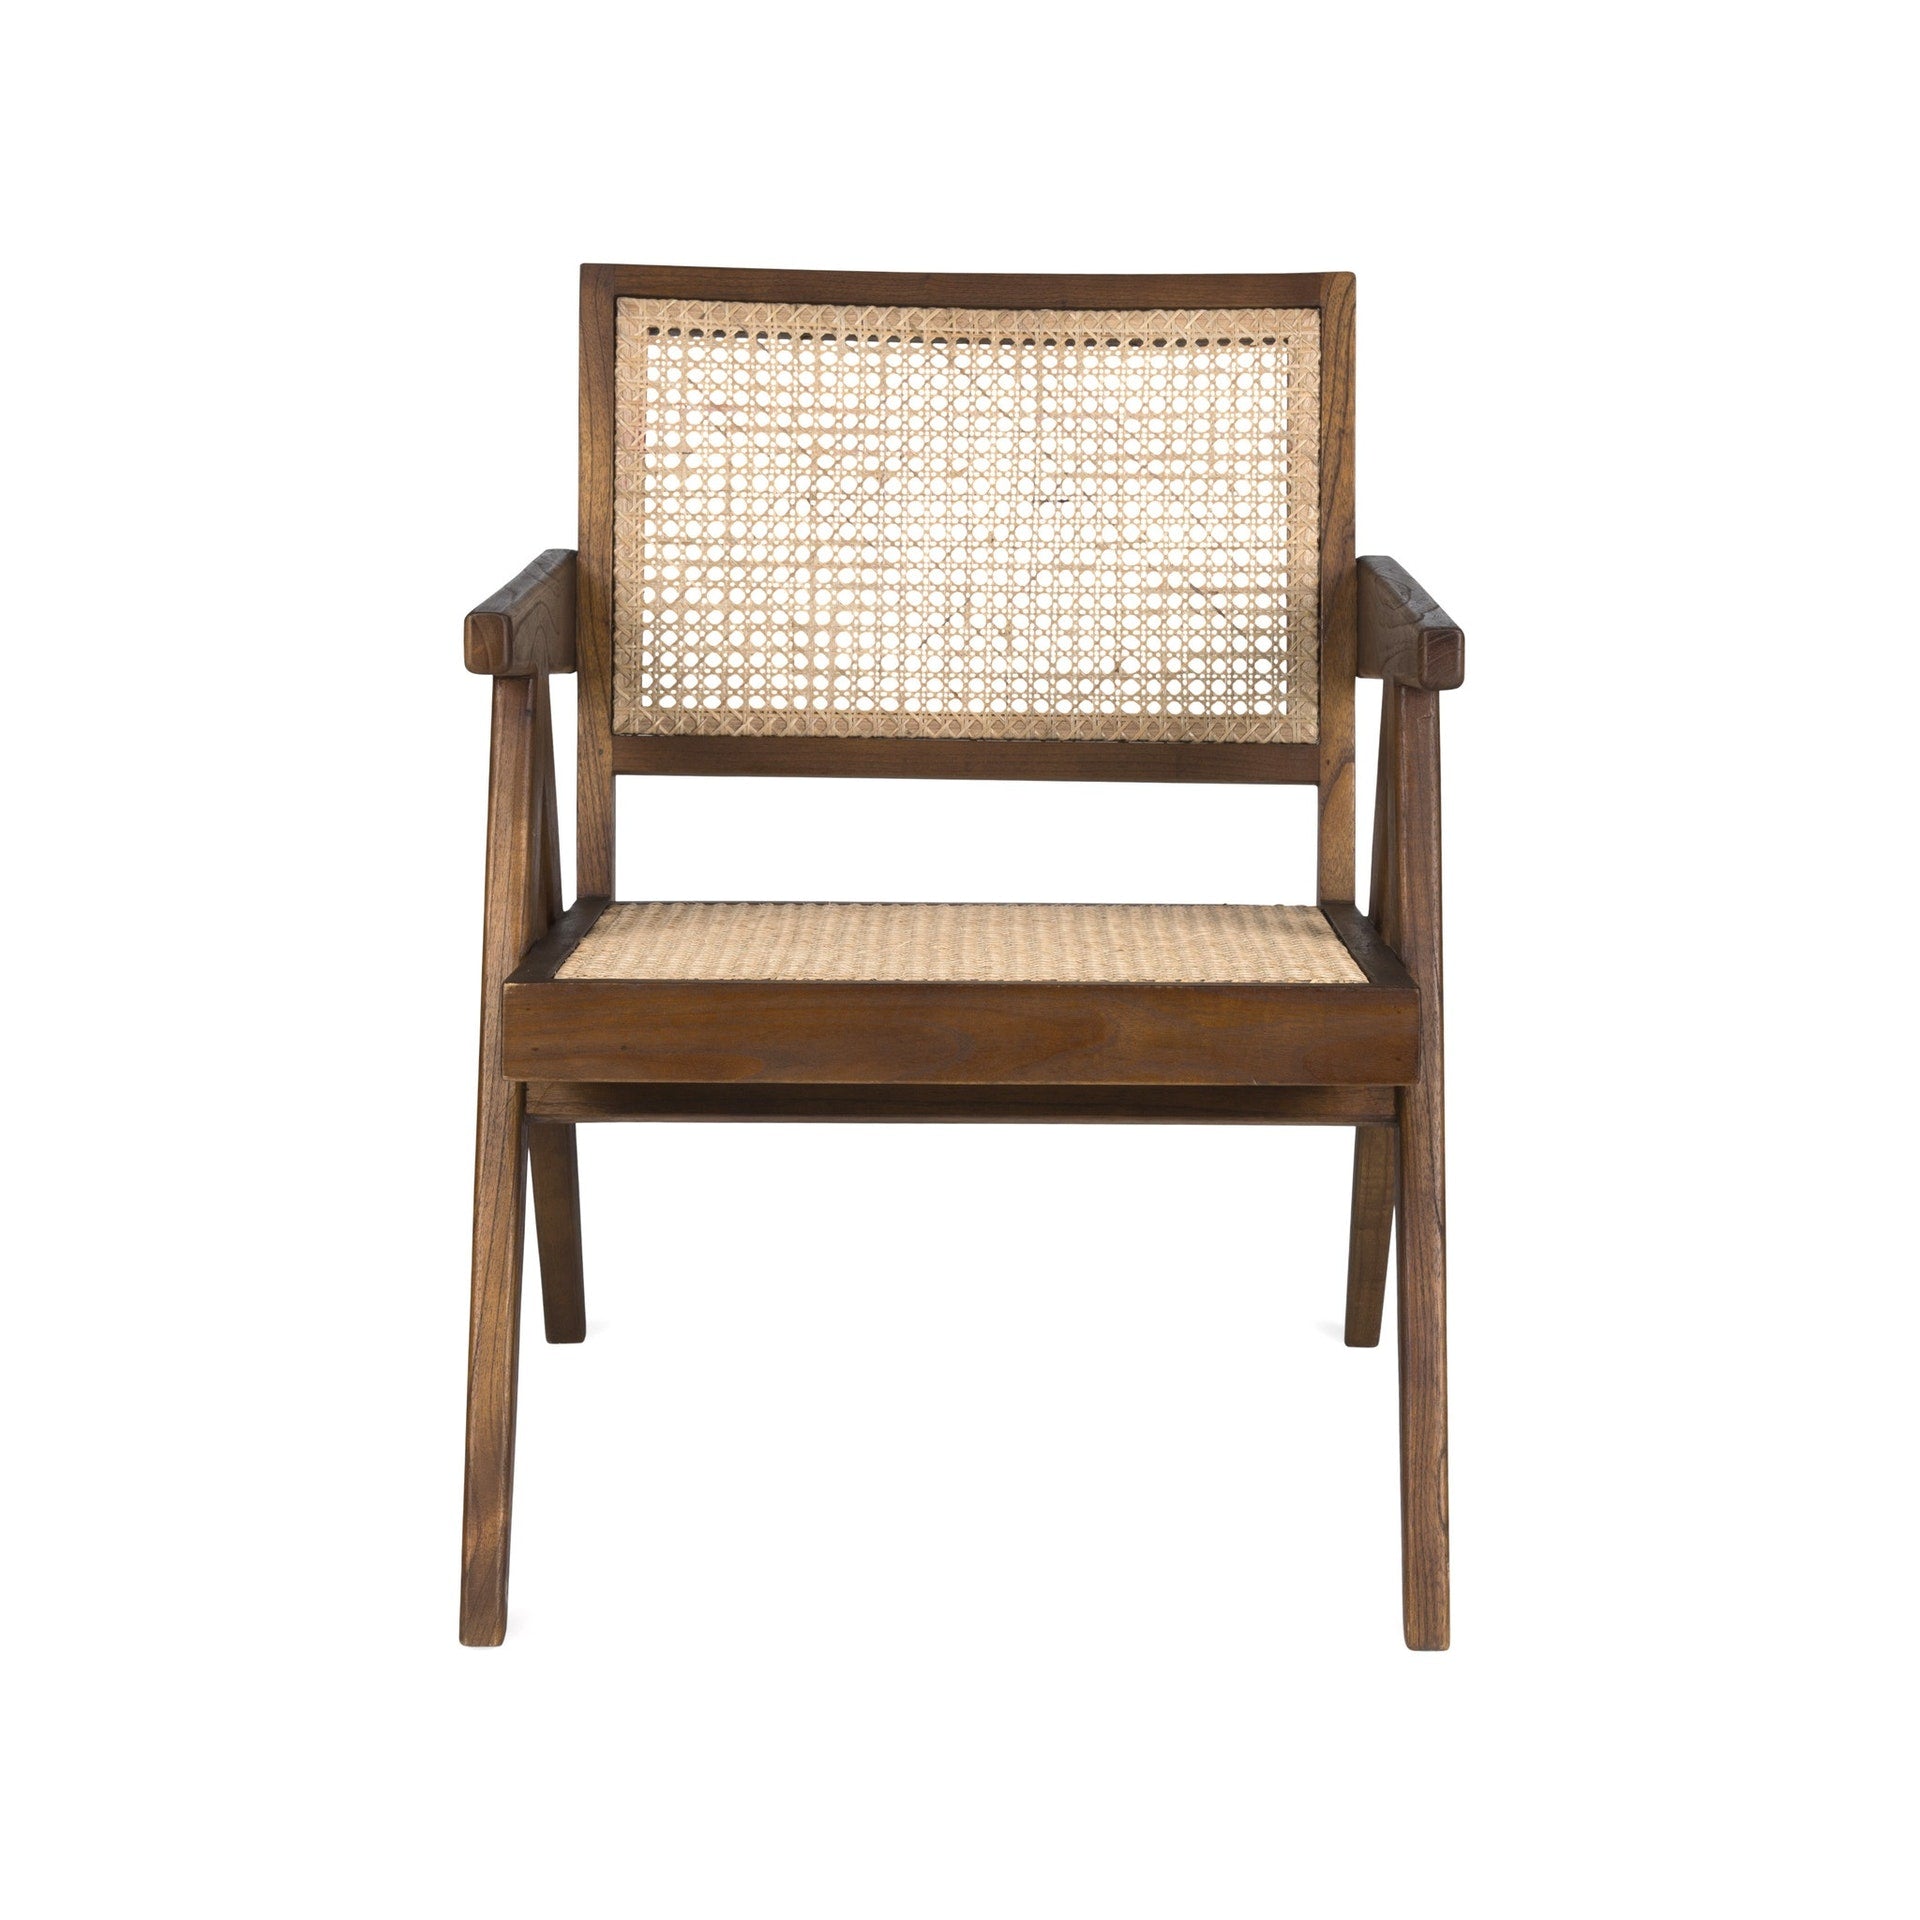 Easy Lounge Chair brown